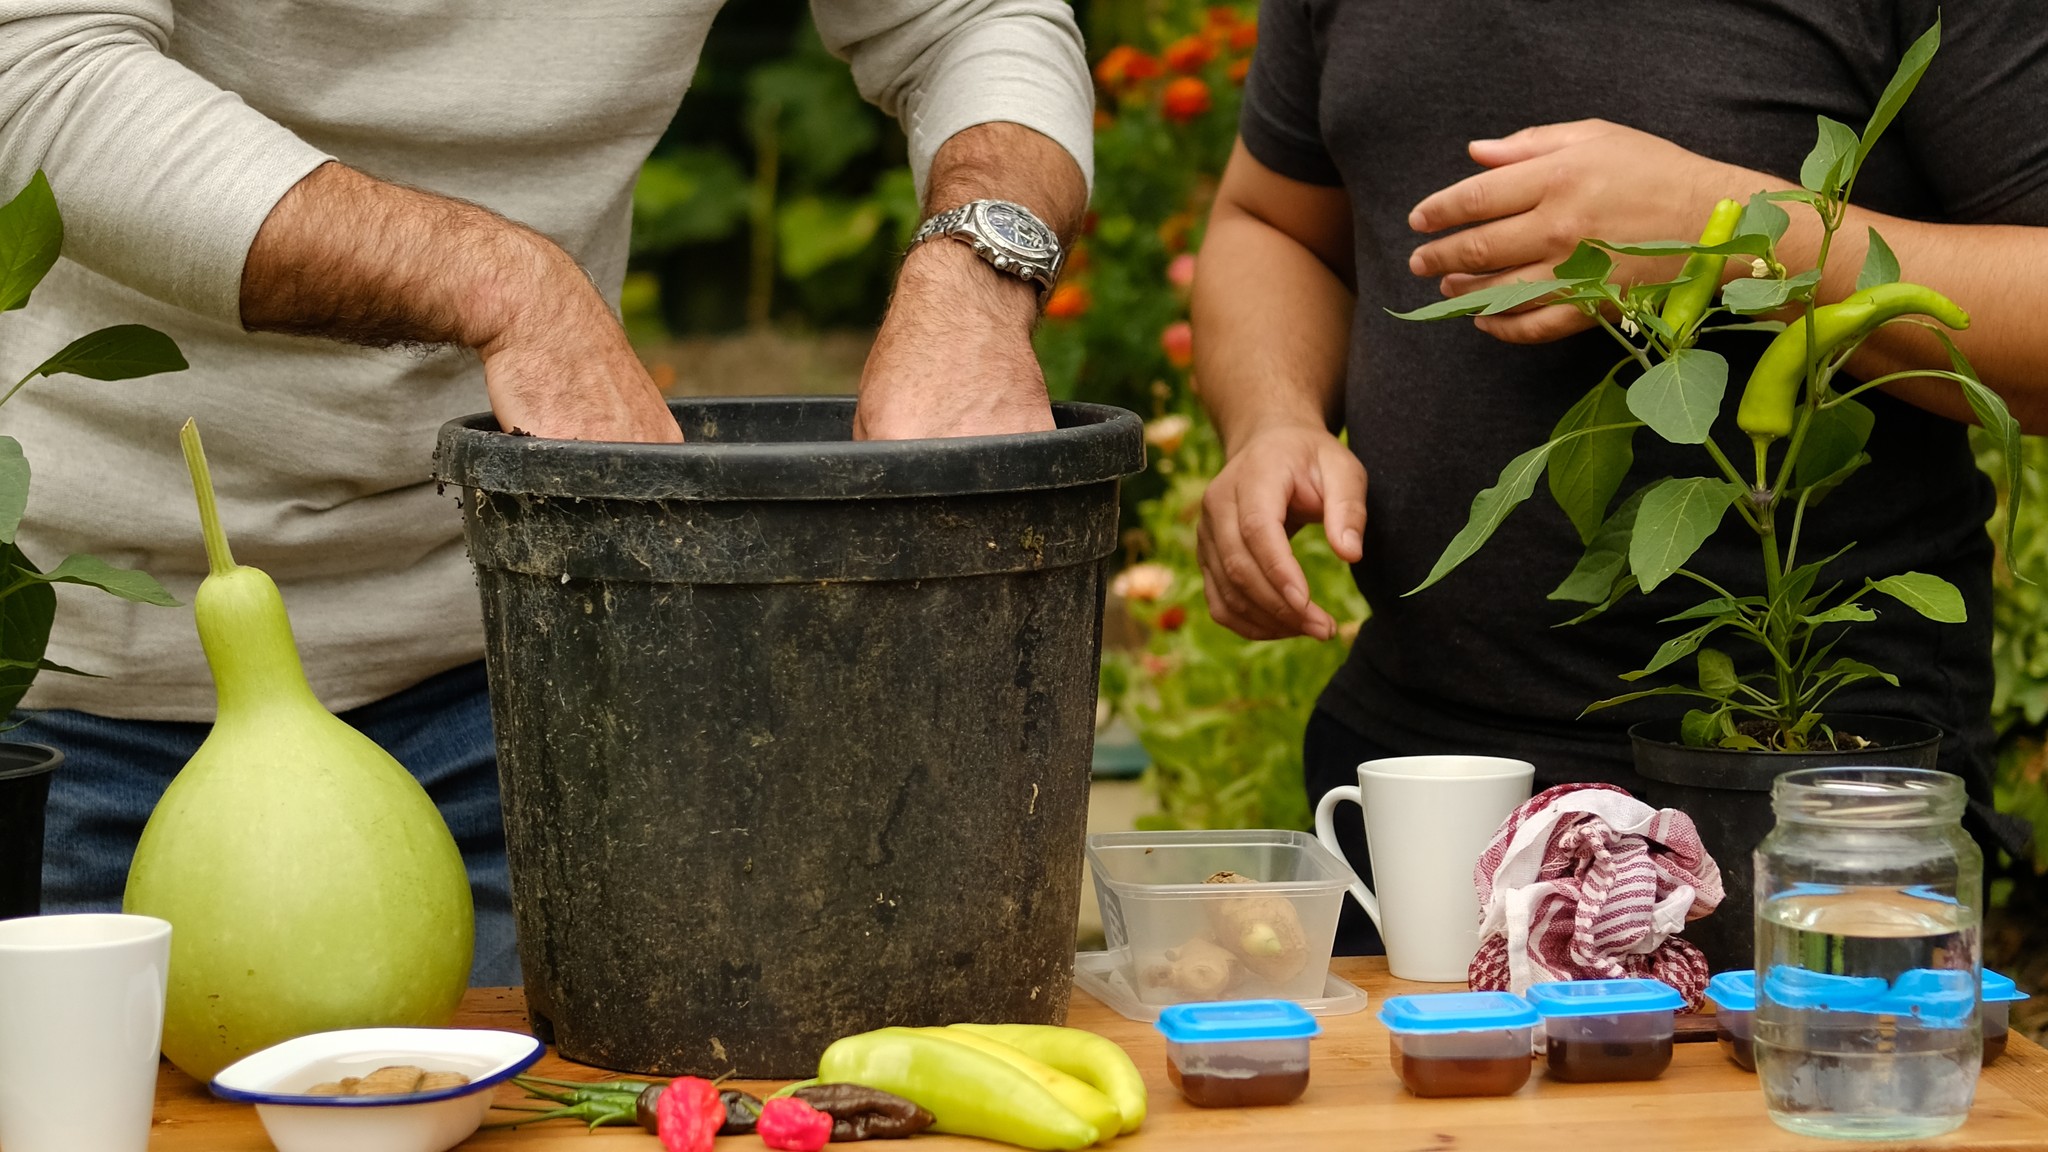 Marcus Wareing sorts through a pot with soil in it, along with special guest on Tales from A Kitchen Garden